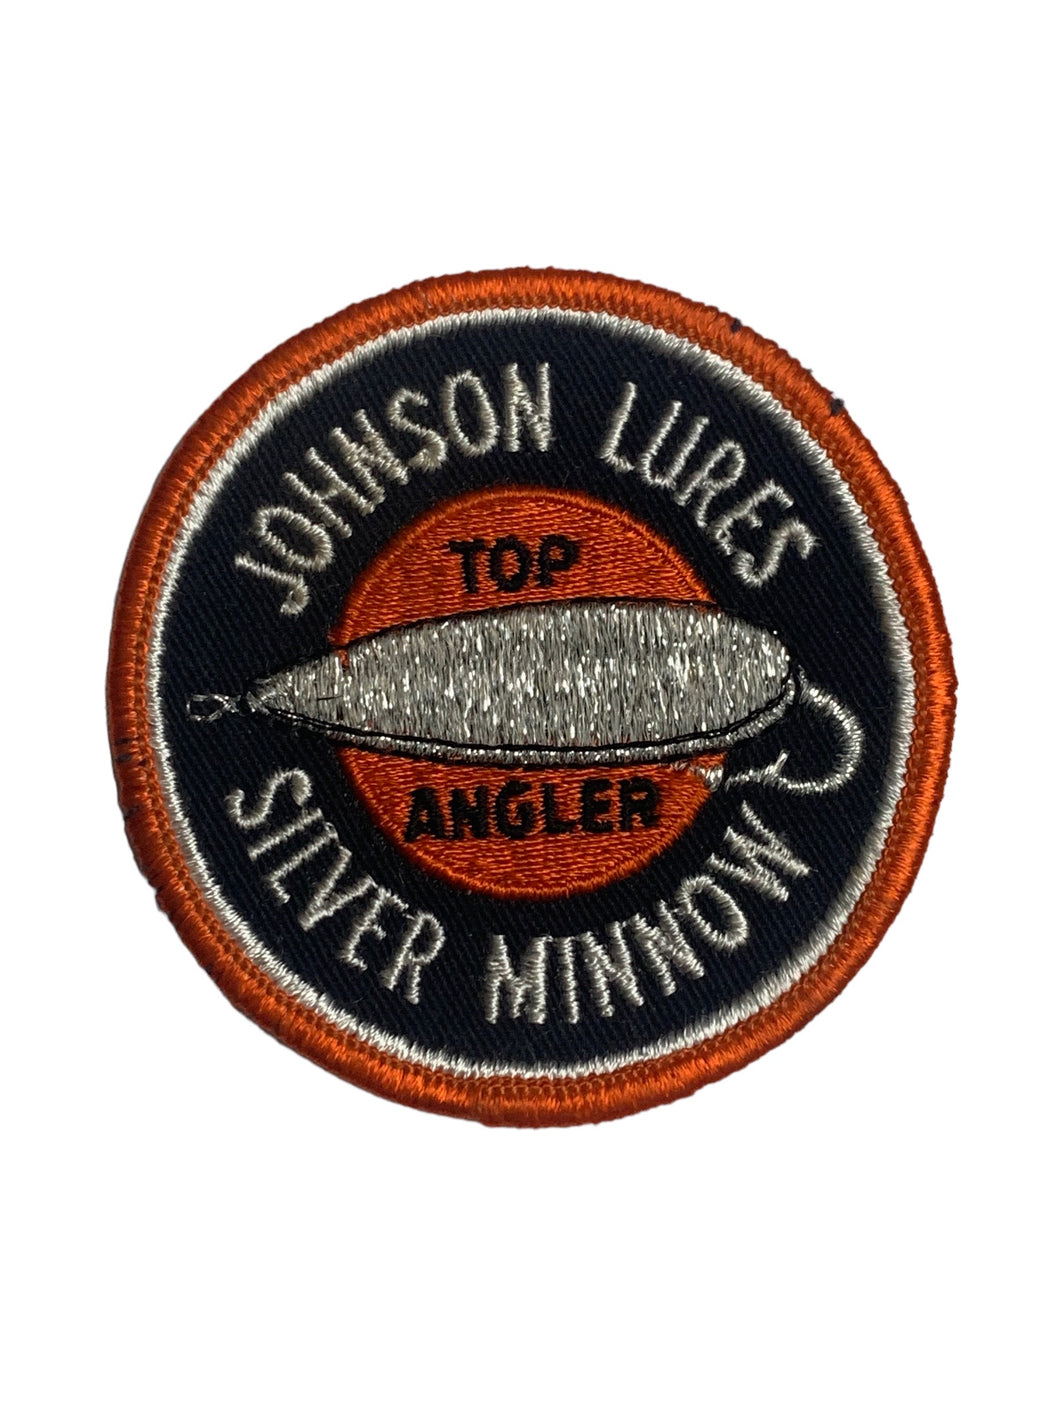 Vintage Johnson Lures Silver Minnow Fishing Lure Patch